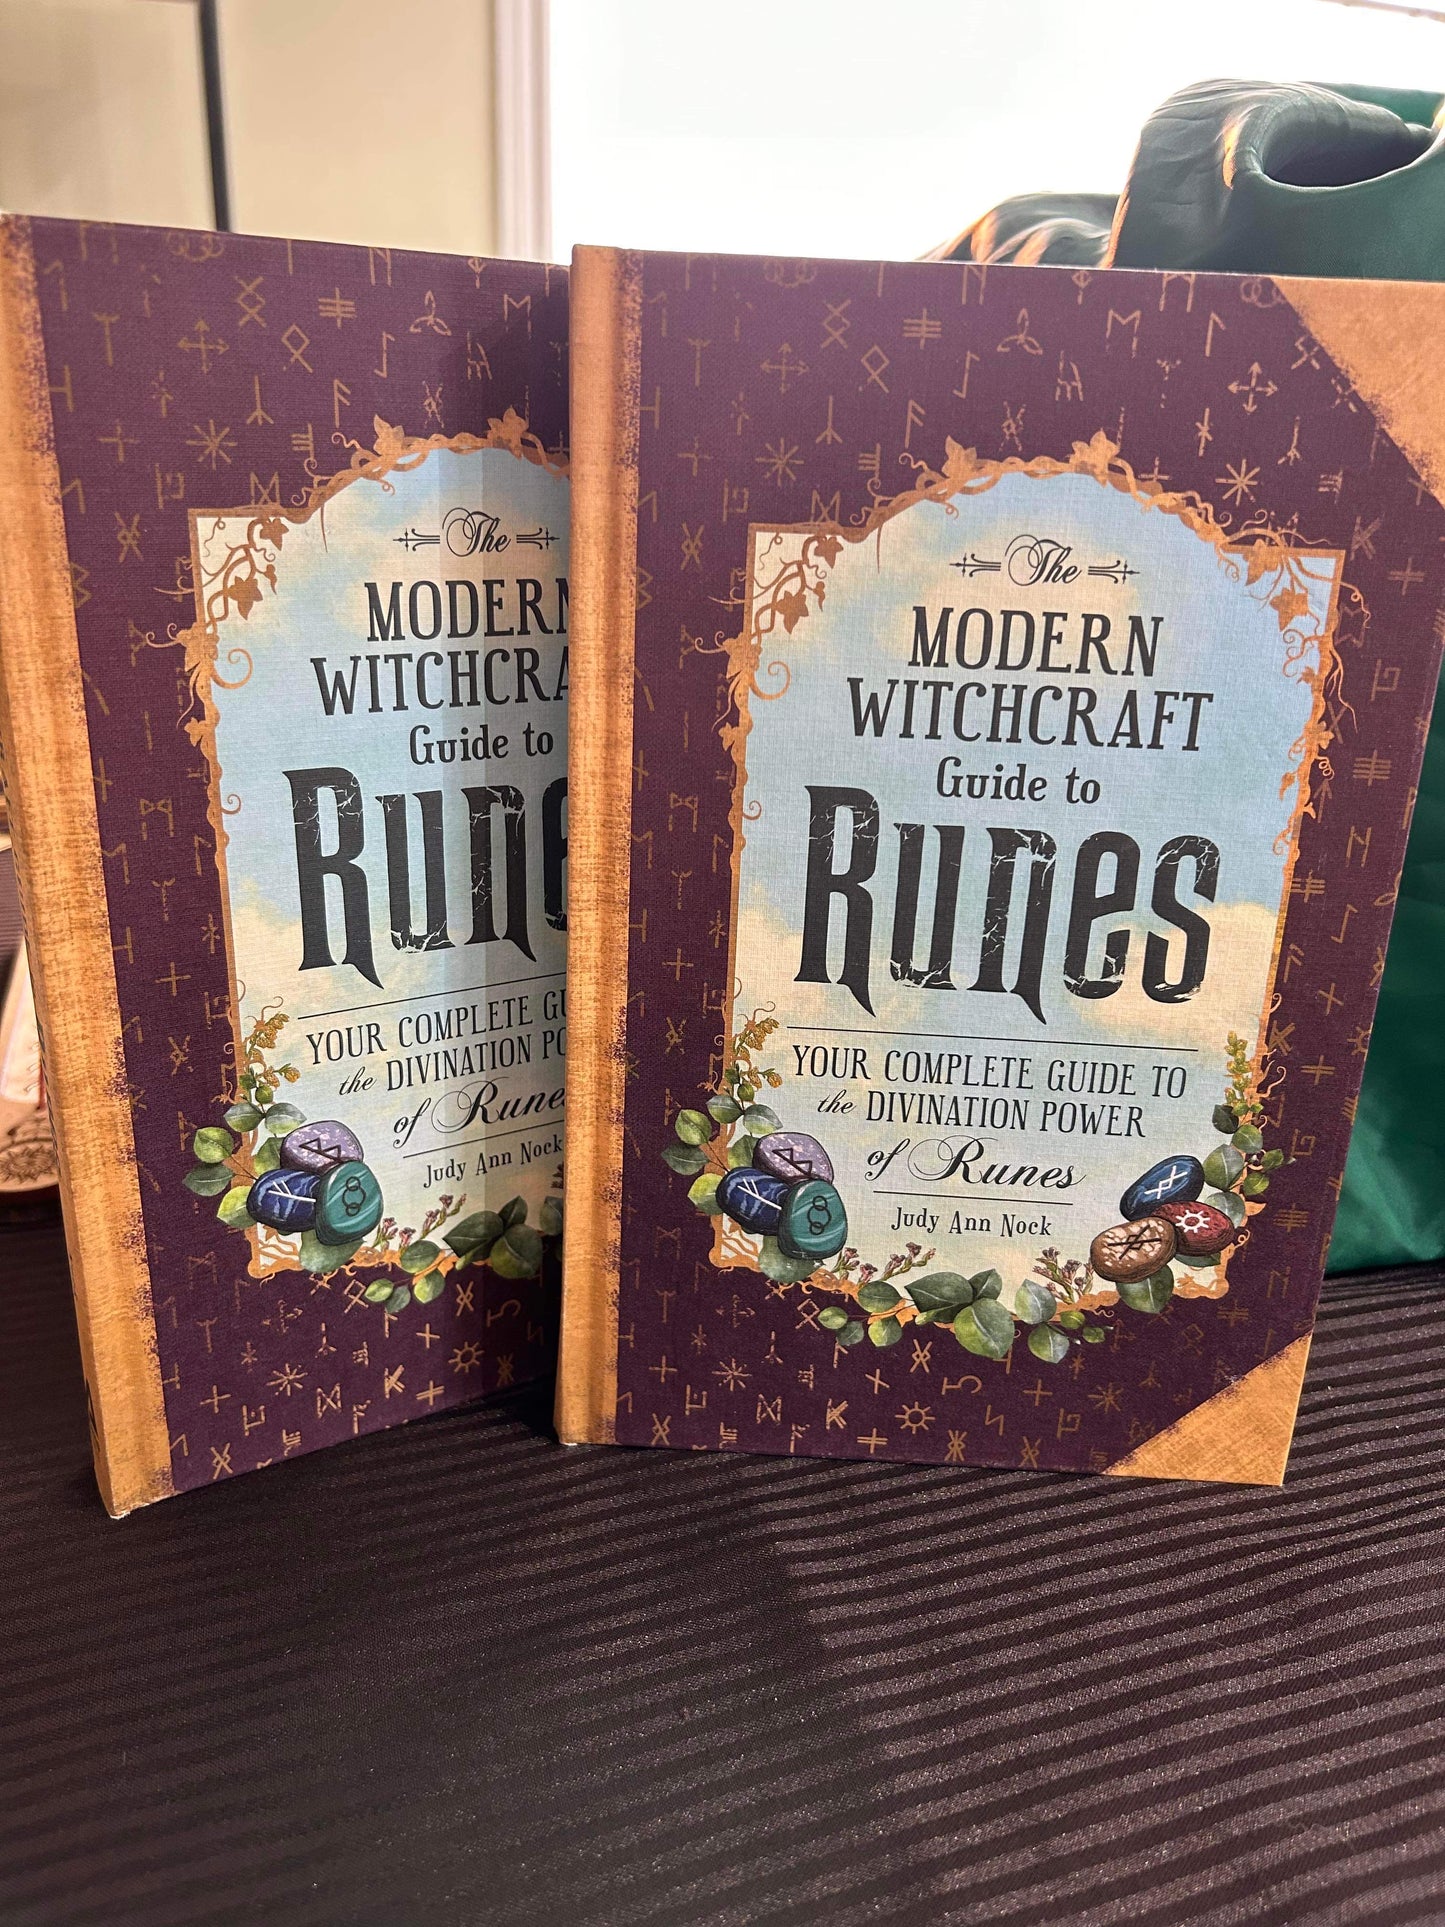 Modern Witchcraft Guide to Runes by